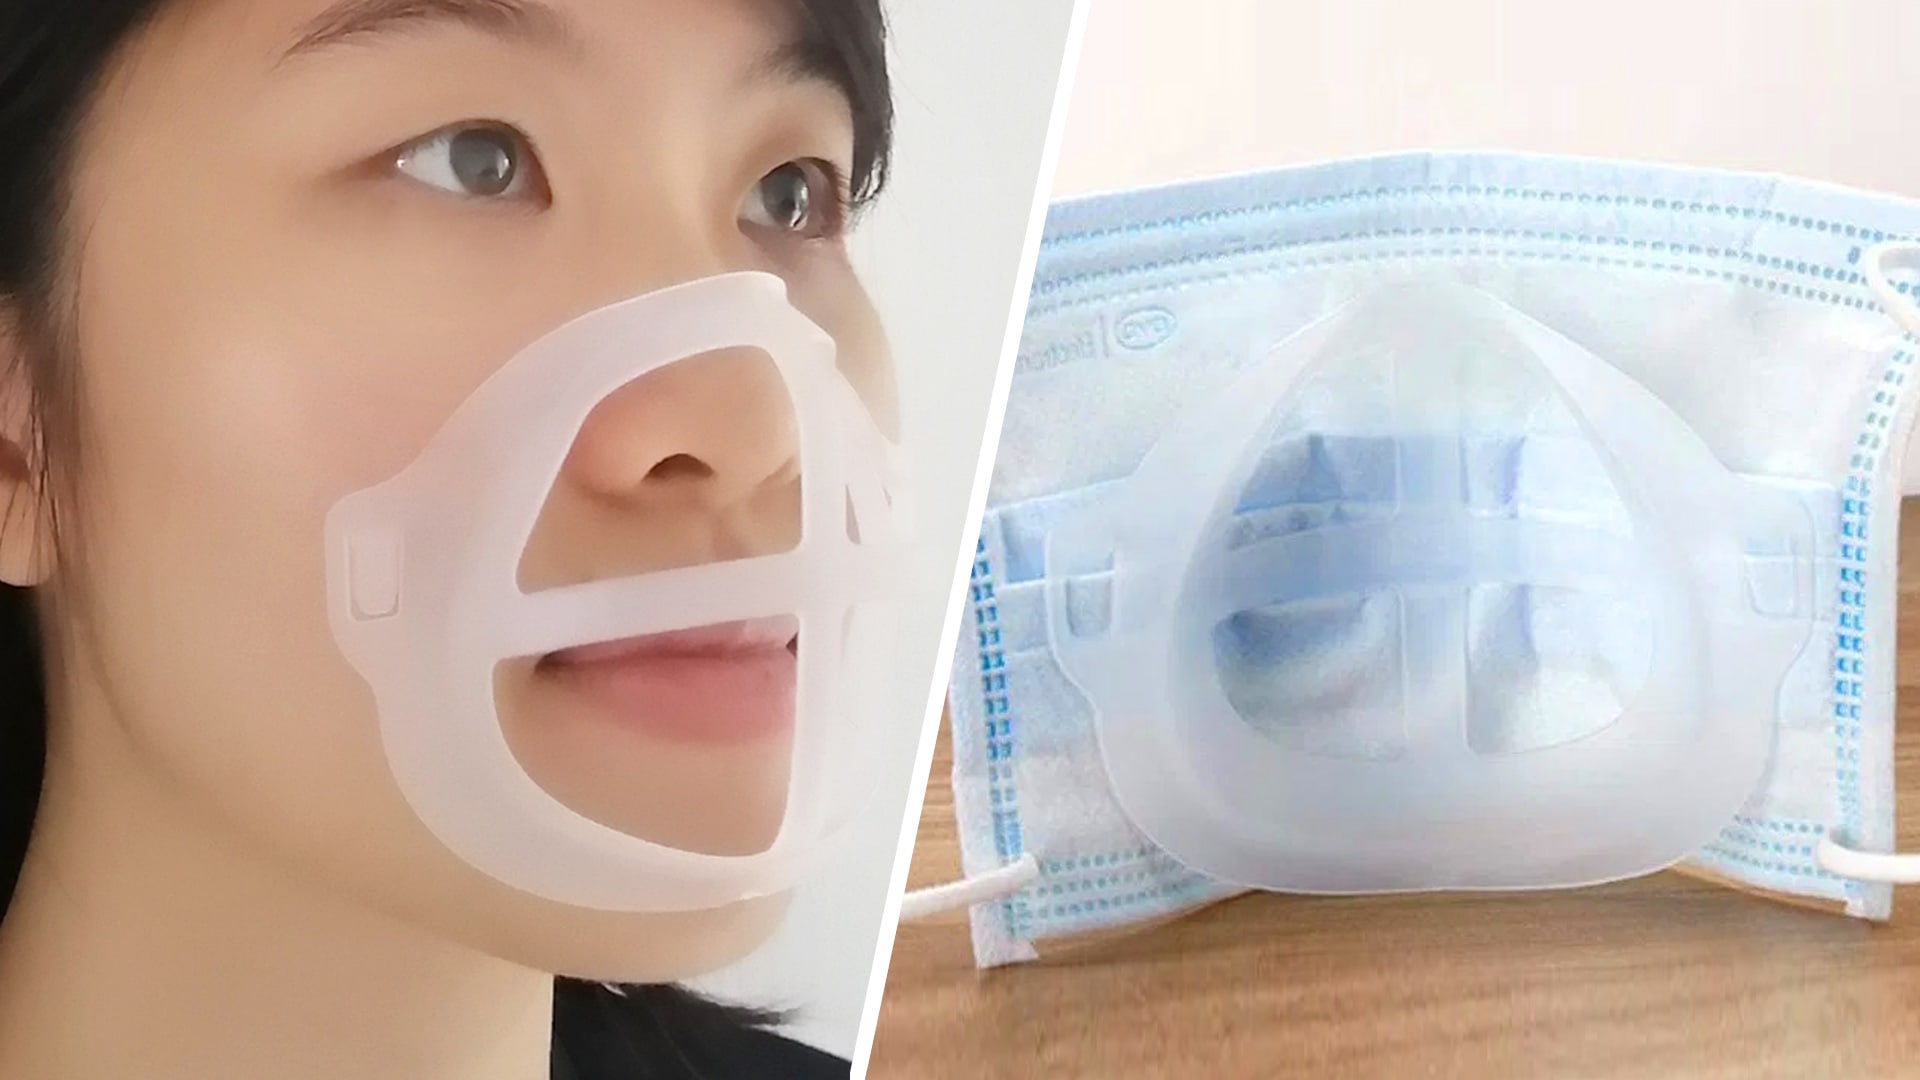 We Tried This Affordable Mask Bracket That’s Supposed To Help You Breathe Better, And This Is What We Think